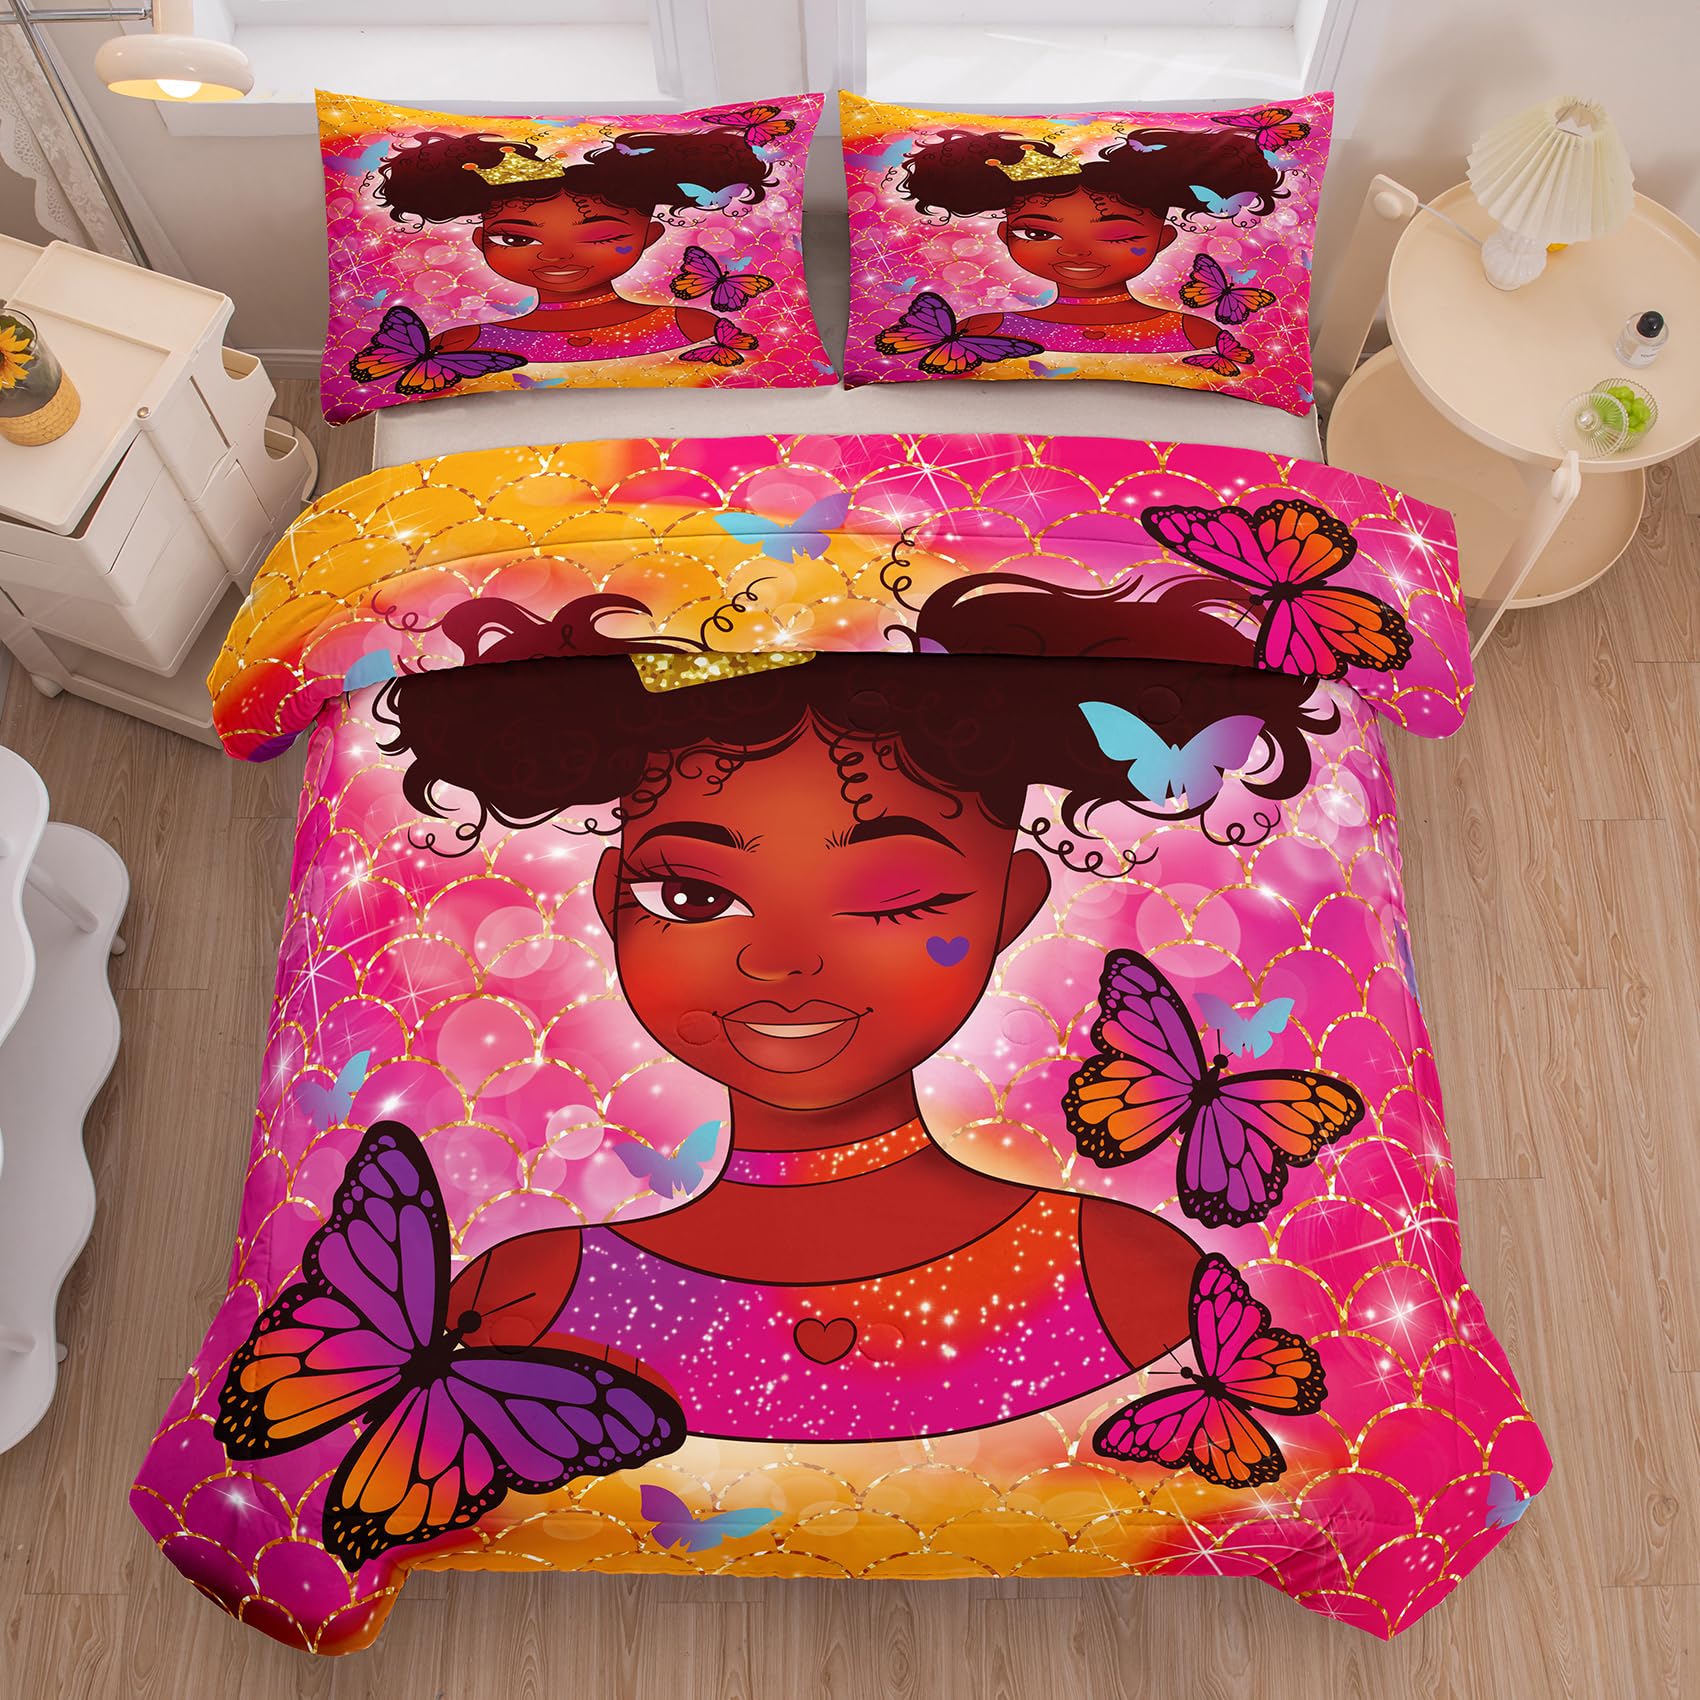 Tailor Shop Kawaii African American Black Girl Comforter Set Pink and Red Bedding Sets for Girls Kids Cute Magic Black Girl Bedding Set Mermaid Butterfly Comforter Full Size with 2 Pillowcase…